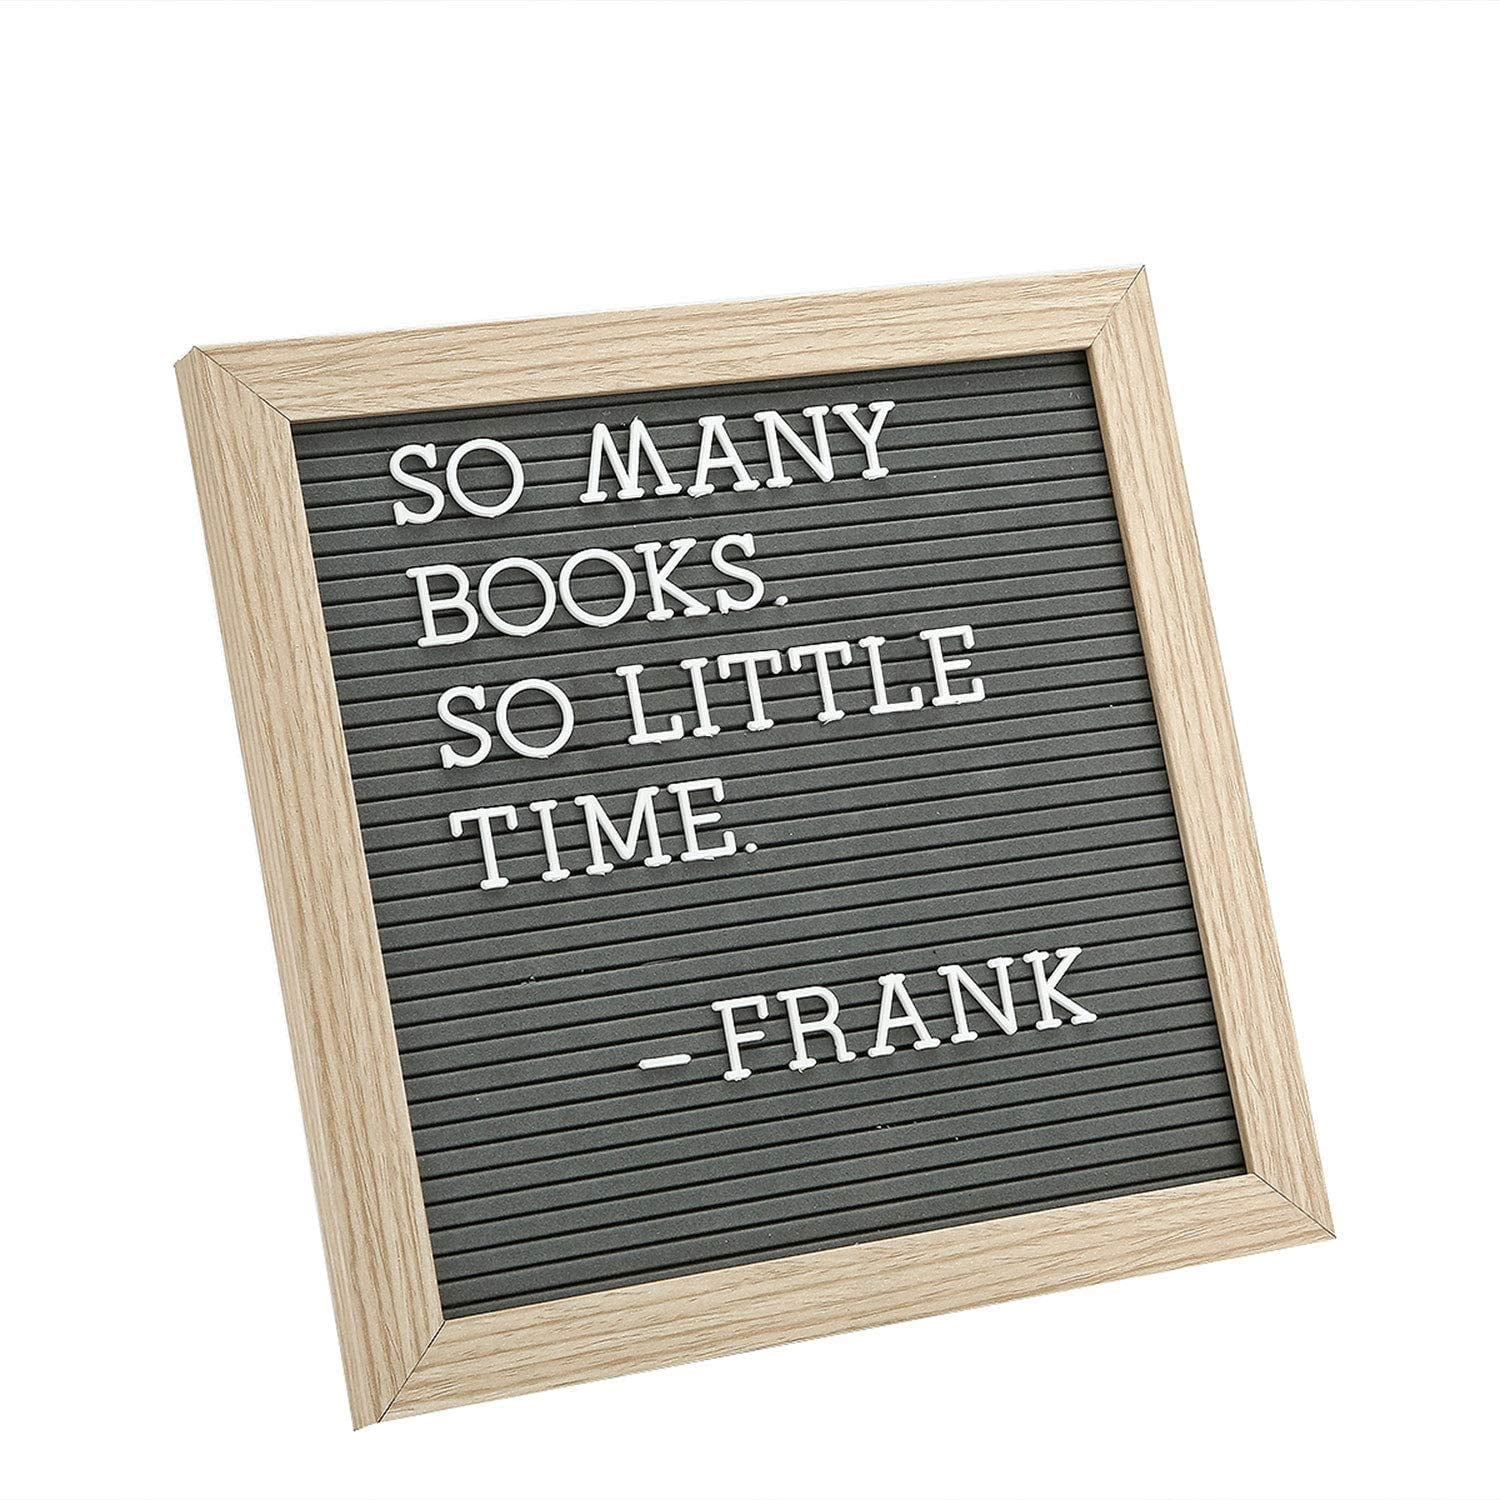 OFFICE ENVY LETTER BOARD DESK SIGN 10X20 INCH INCLUDES 190 LETTERS AND SYMBOLS 